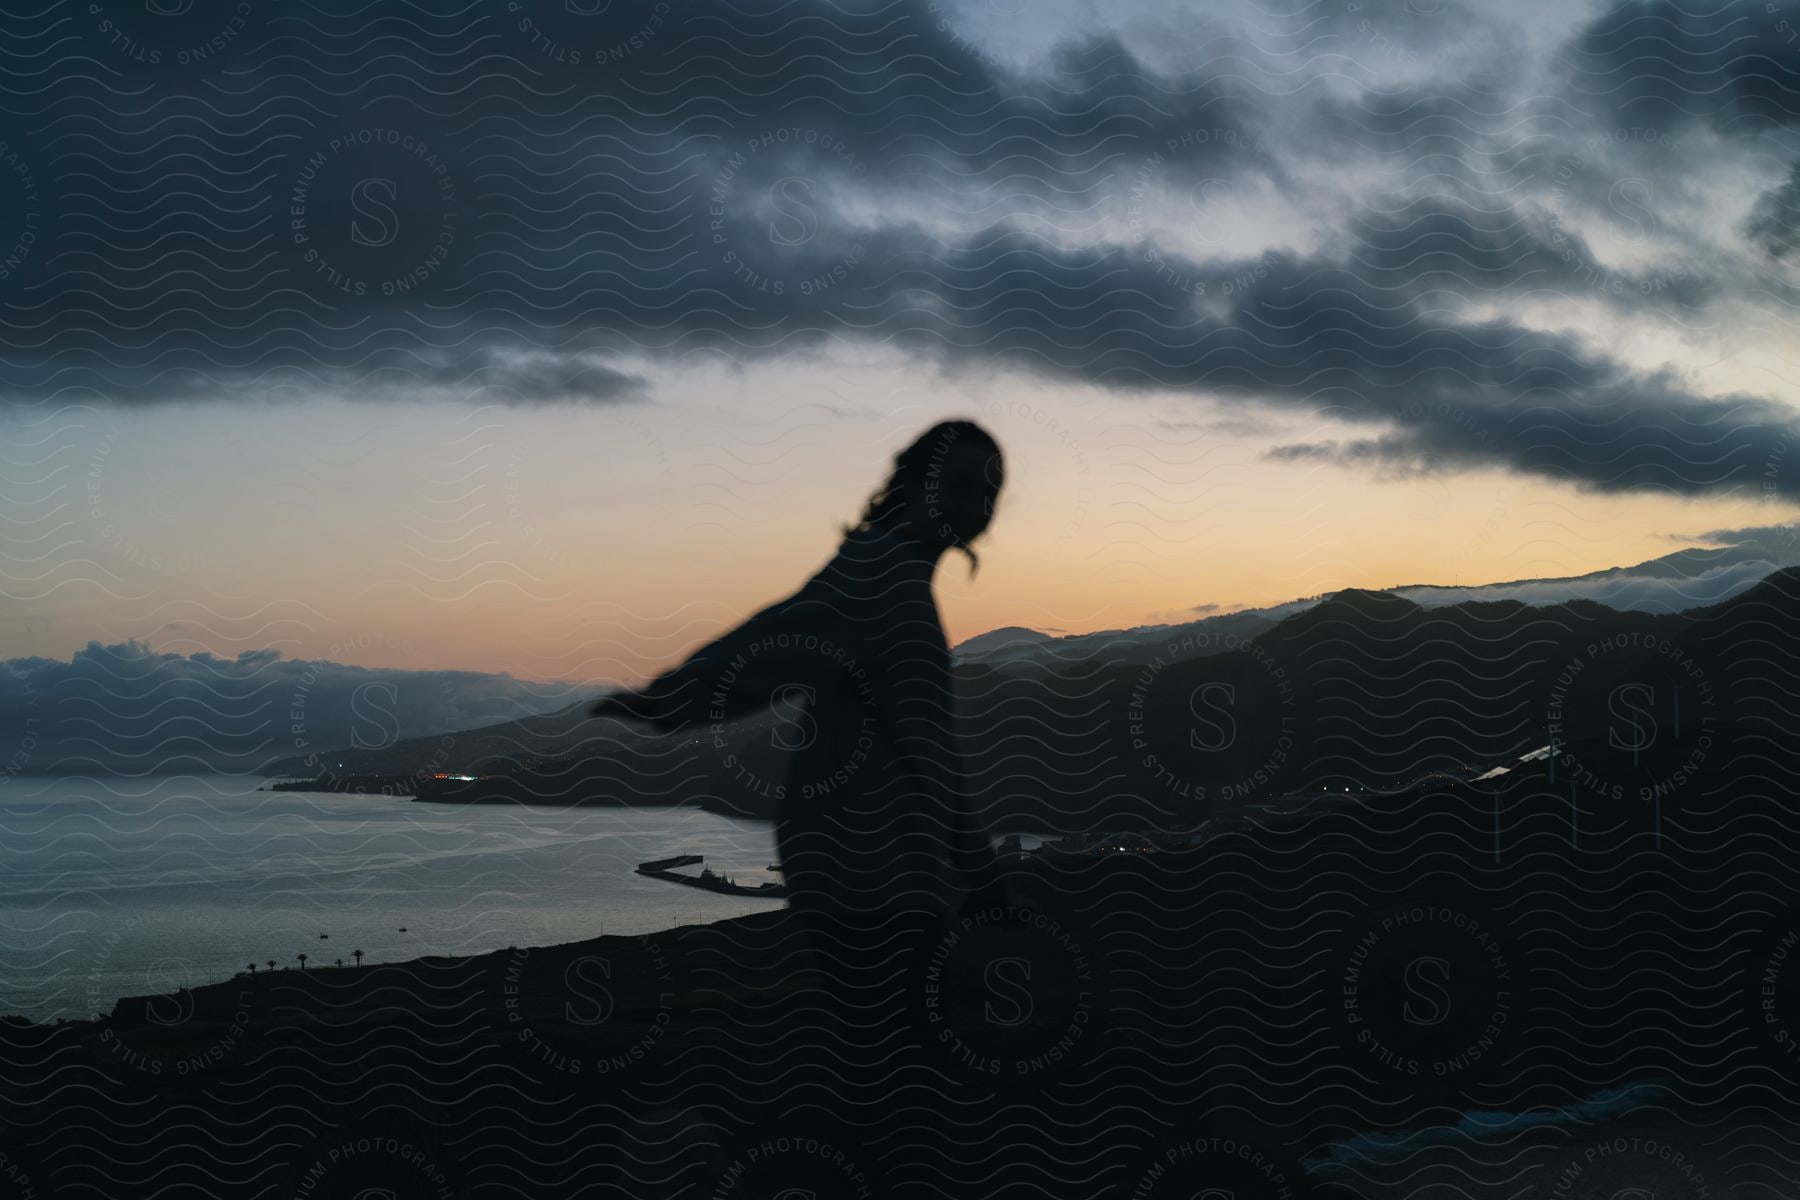 Silhouette of a person standing along the coast with mountains in the distance under a dark cloudy sky